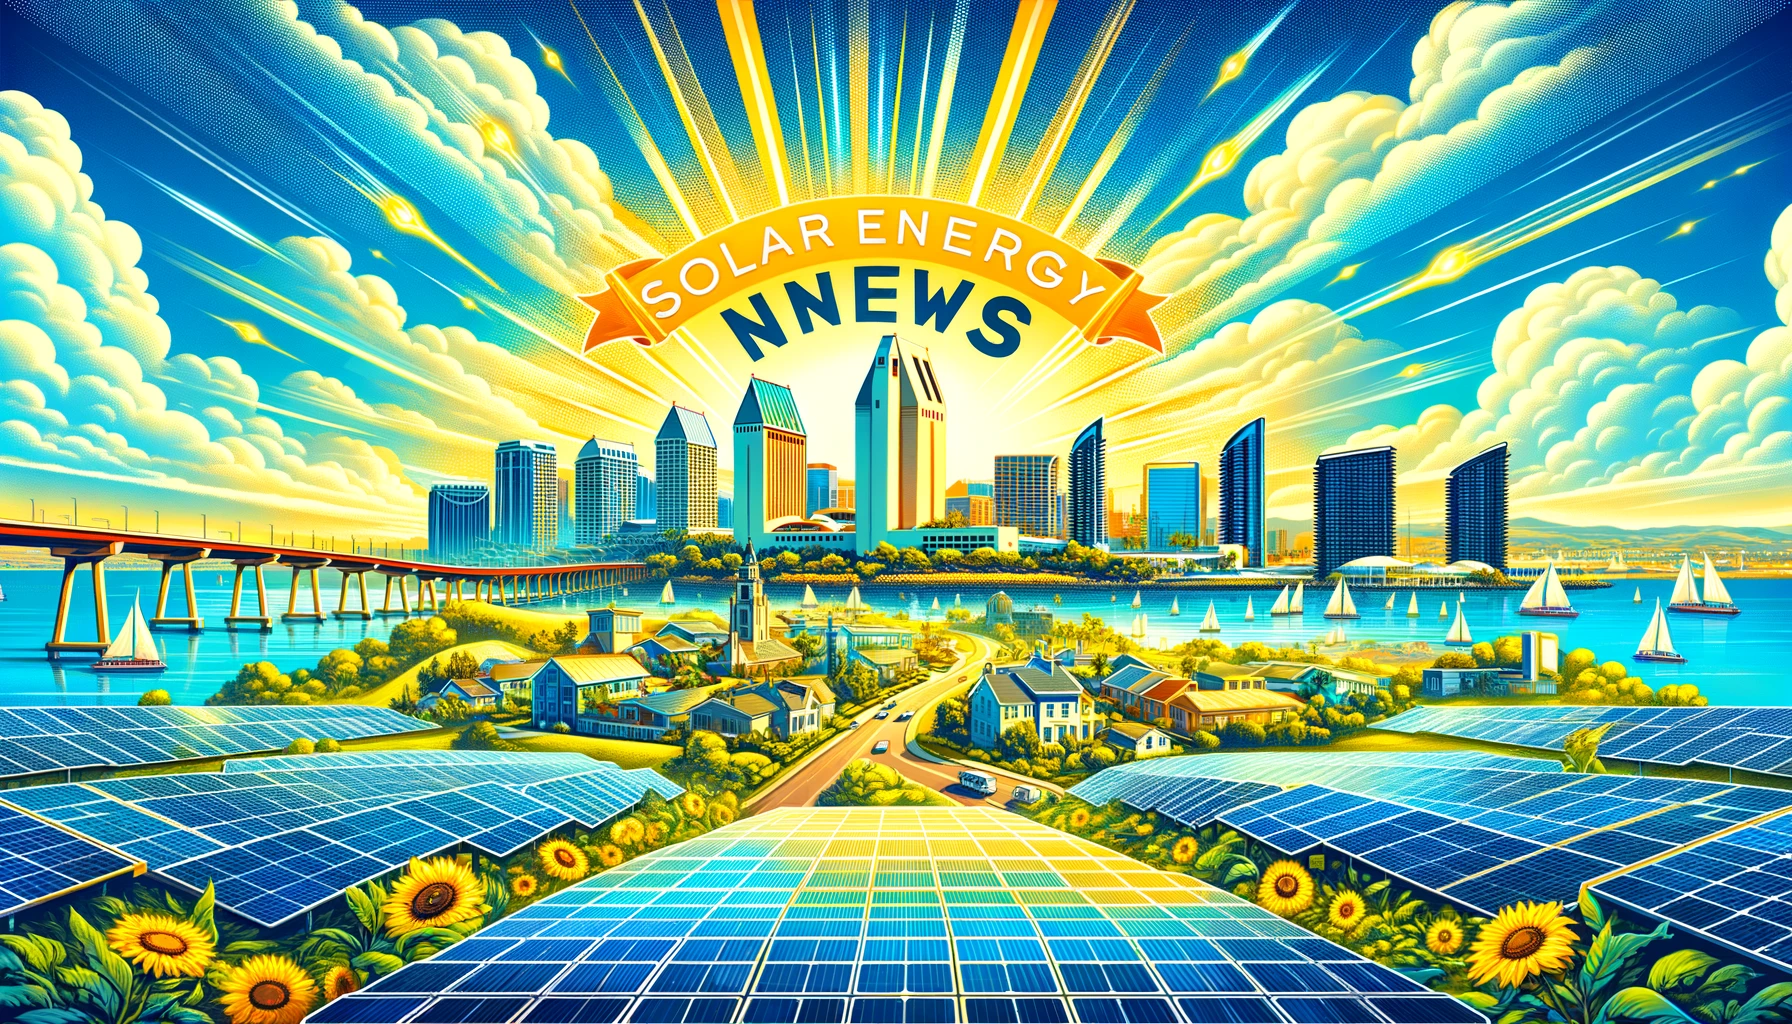 "Stay updated with the latest solar energy news in San Diego. Discover how the sunny city is leading the way in solar innovation and sustainability."